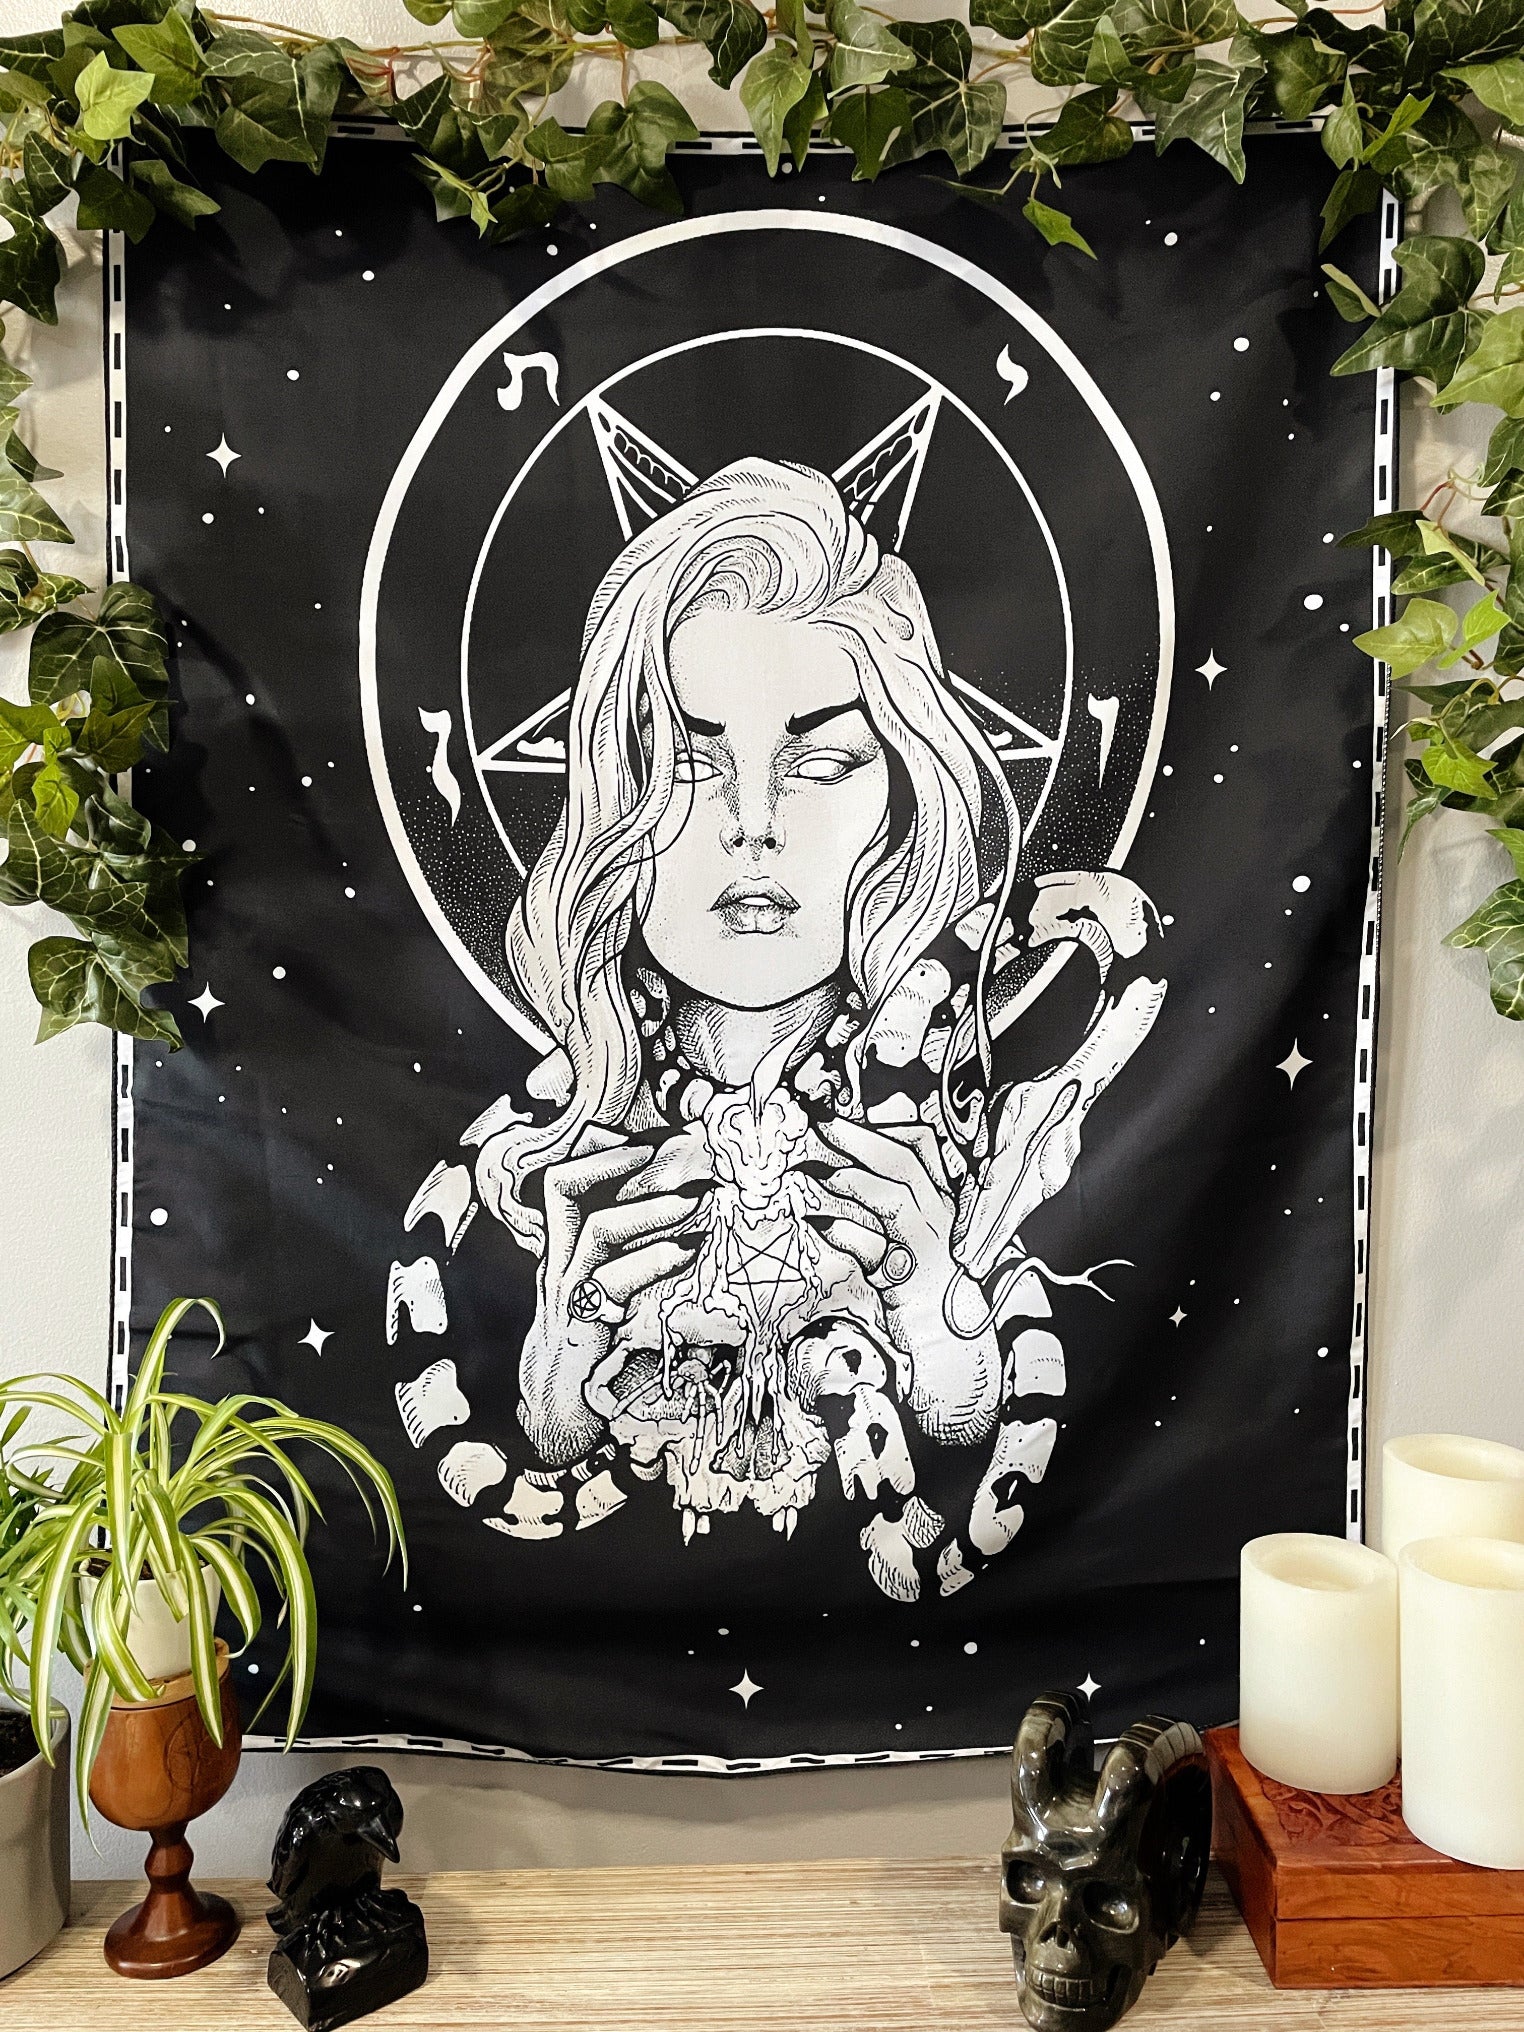 Pictured is a large wall tapestry with a black background and a woman holding a skull with a snake wrapped around it printed in white on it.